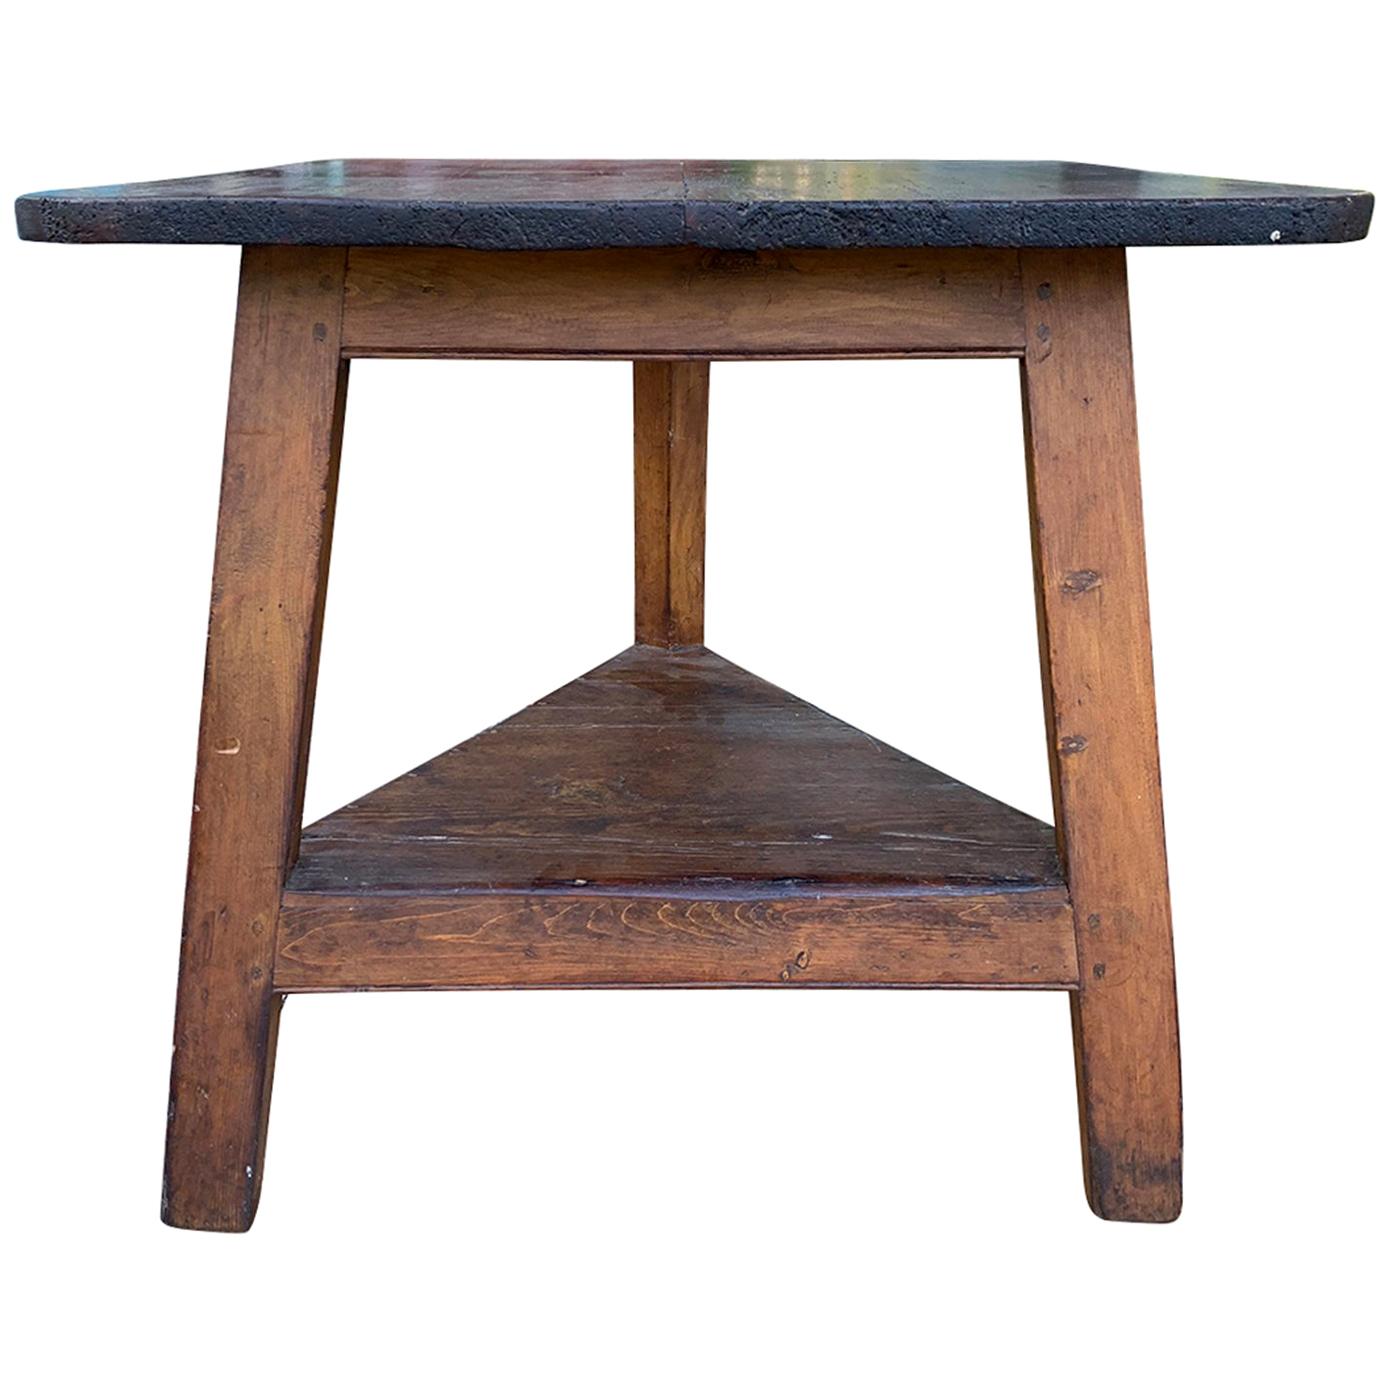 19th Century English Pine Cricket Table with Square Top